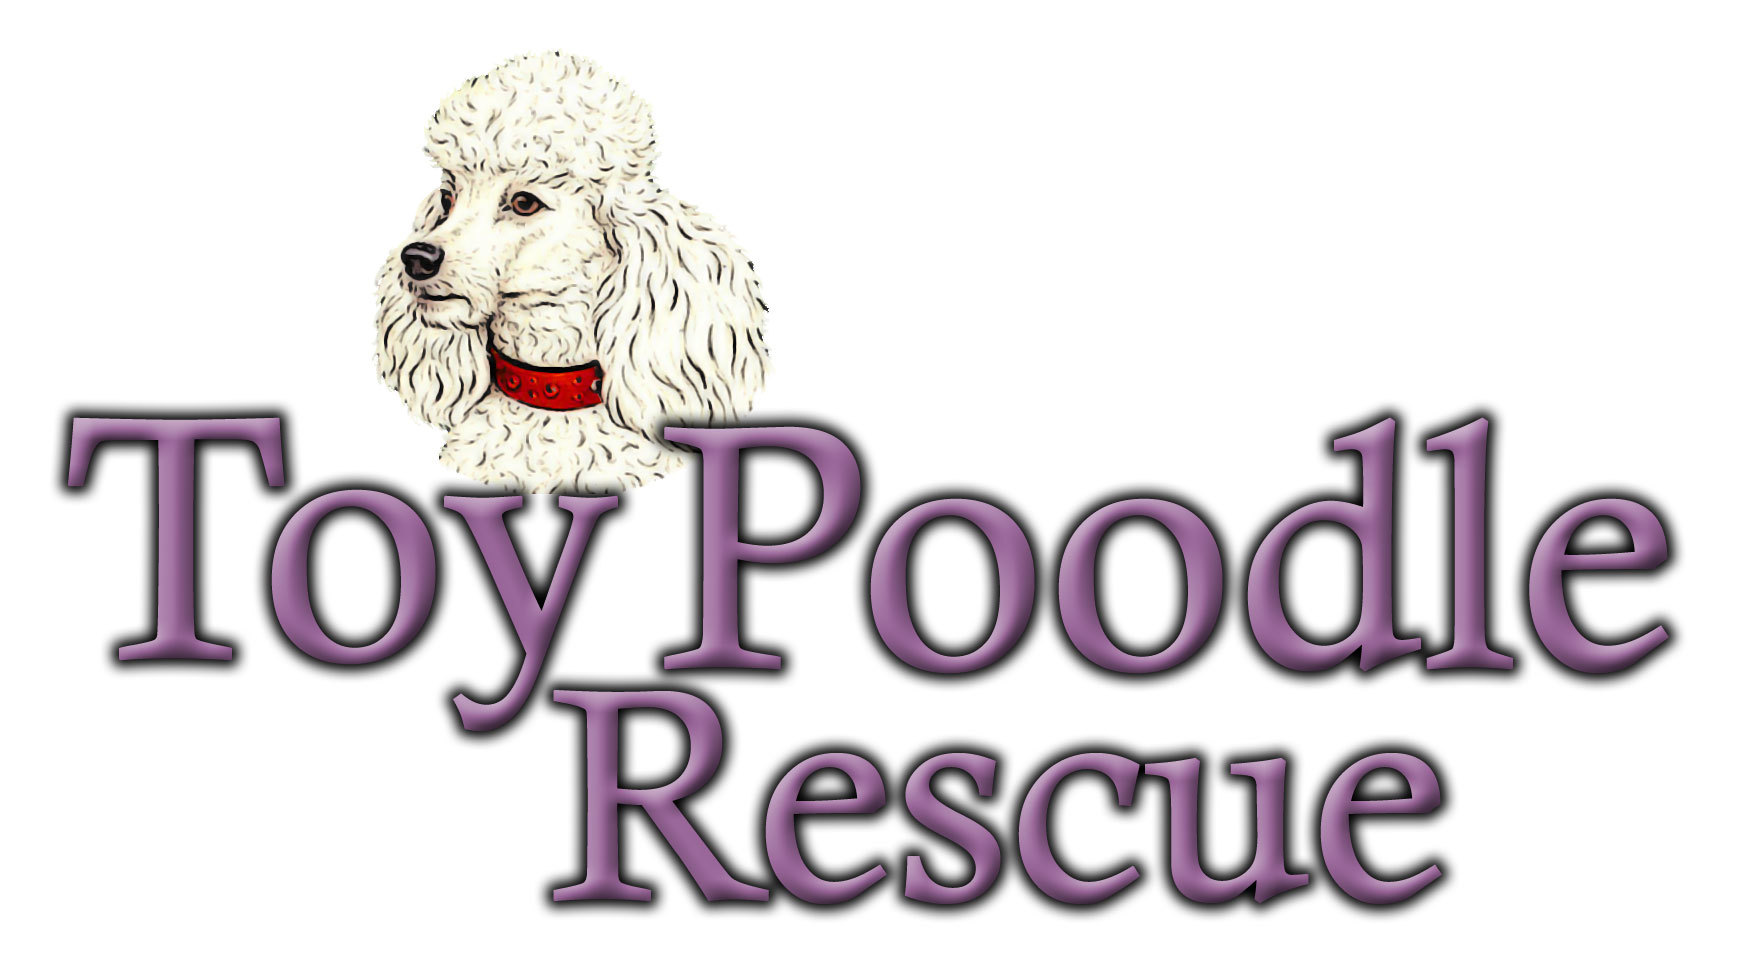 poodle puppies for adoption near me